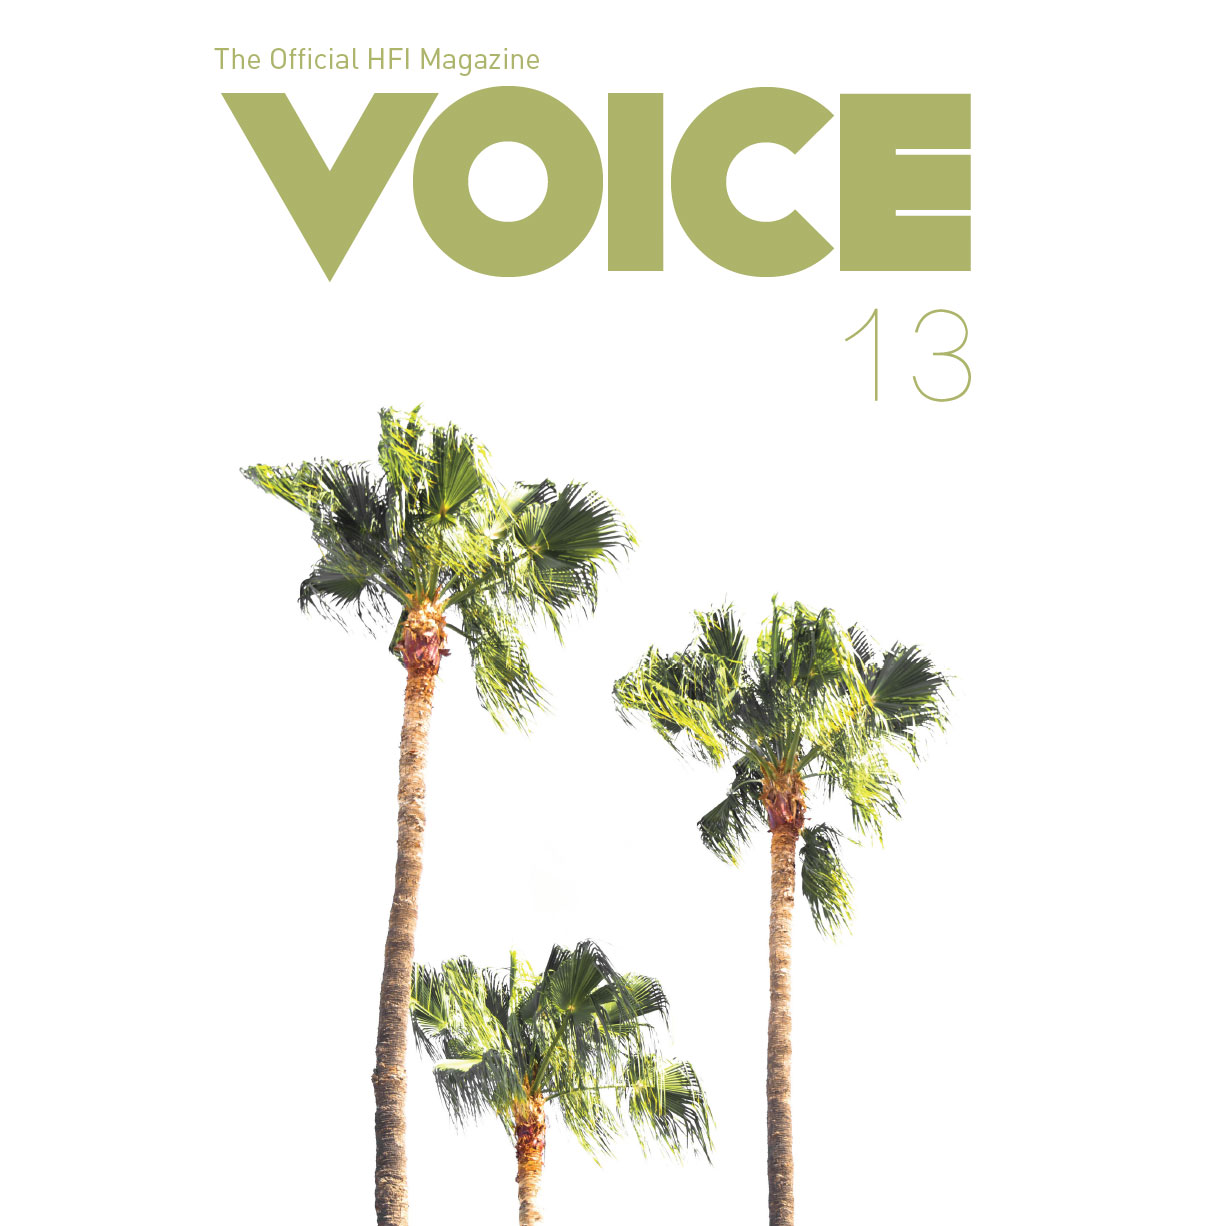 The Official HFI Magazine VOICE 13